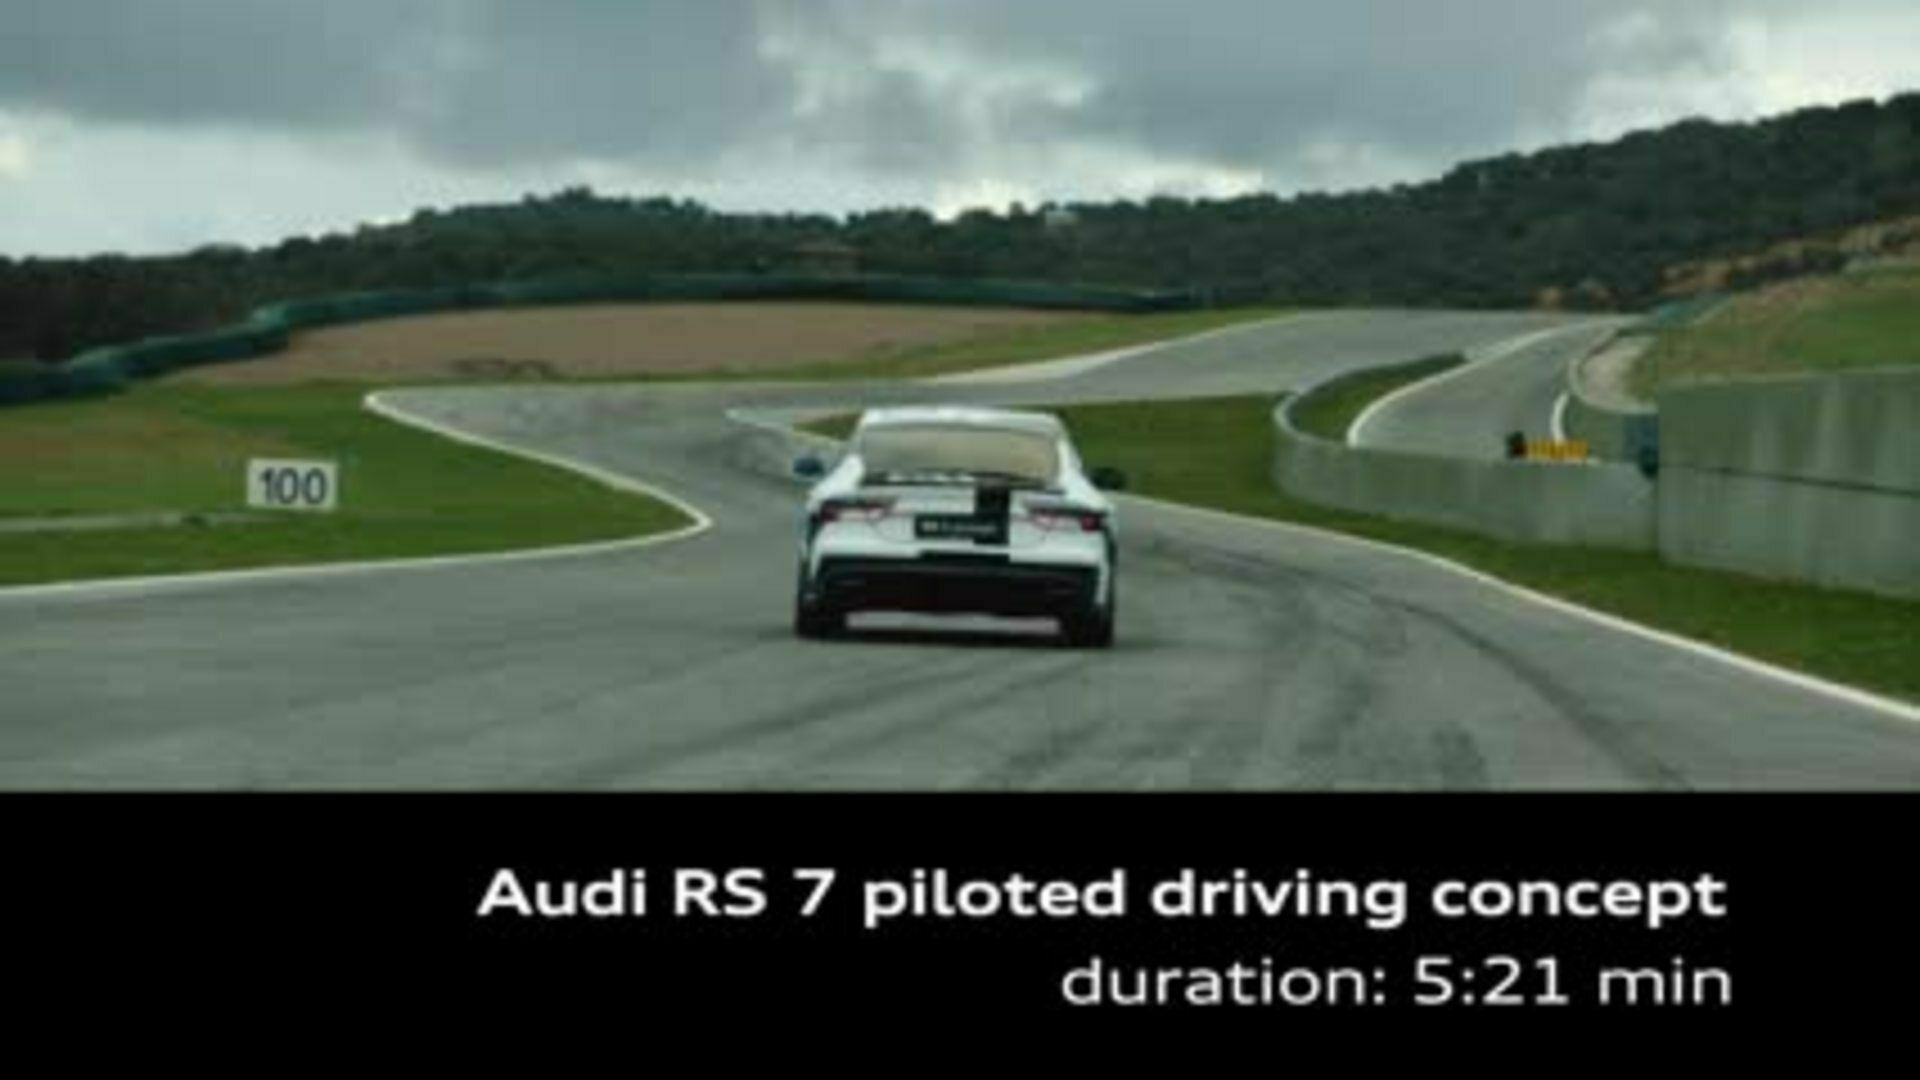 The Audi RS 7 piloted driving concept car on the race track